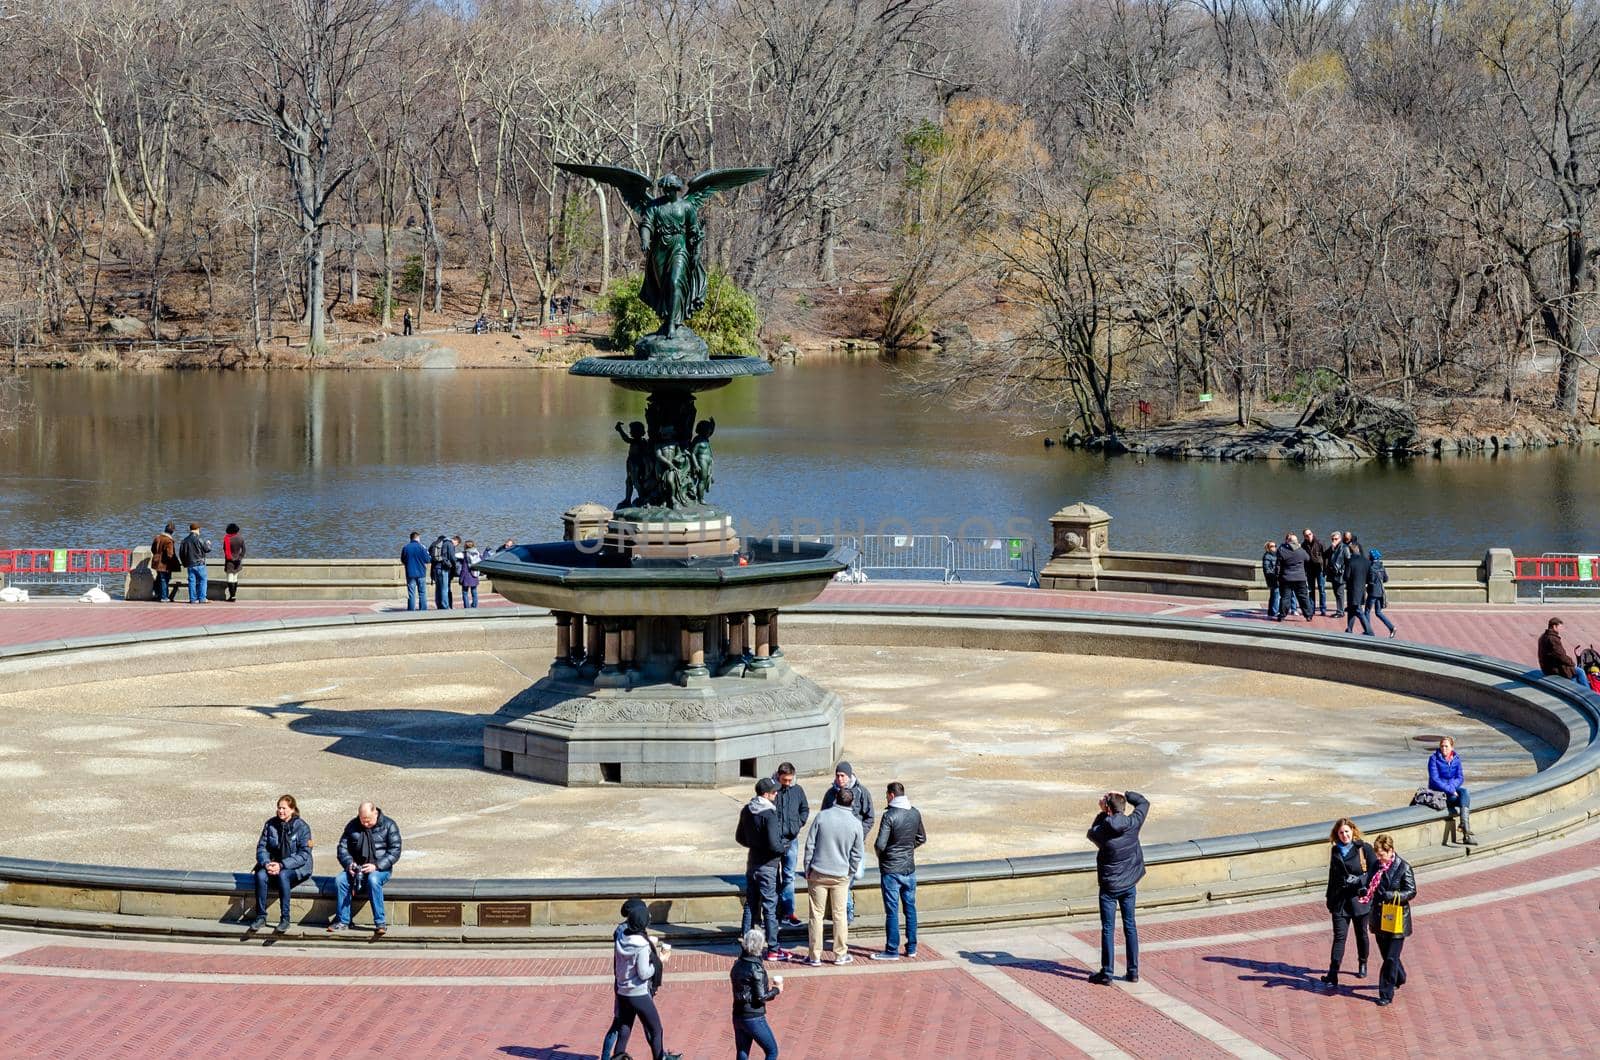 Bethesda Fountain with Angel of the Waters Sculpture with people, Central Park New York by bildgigant